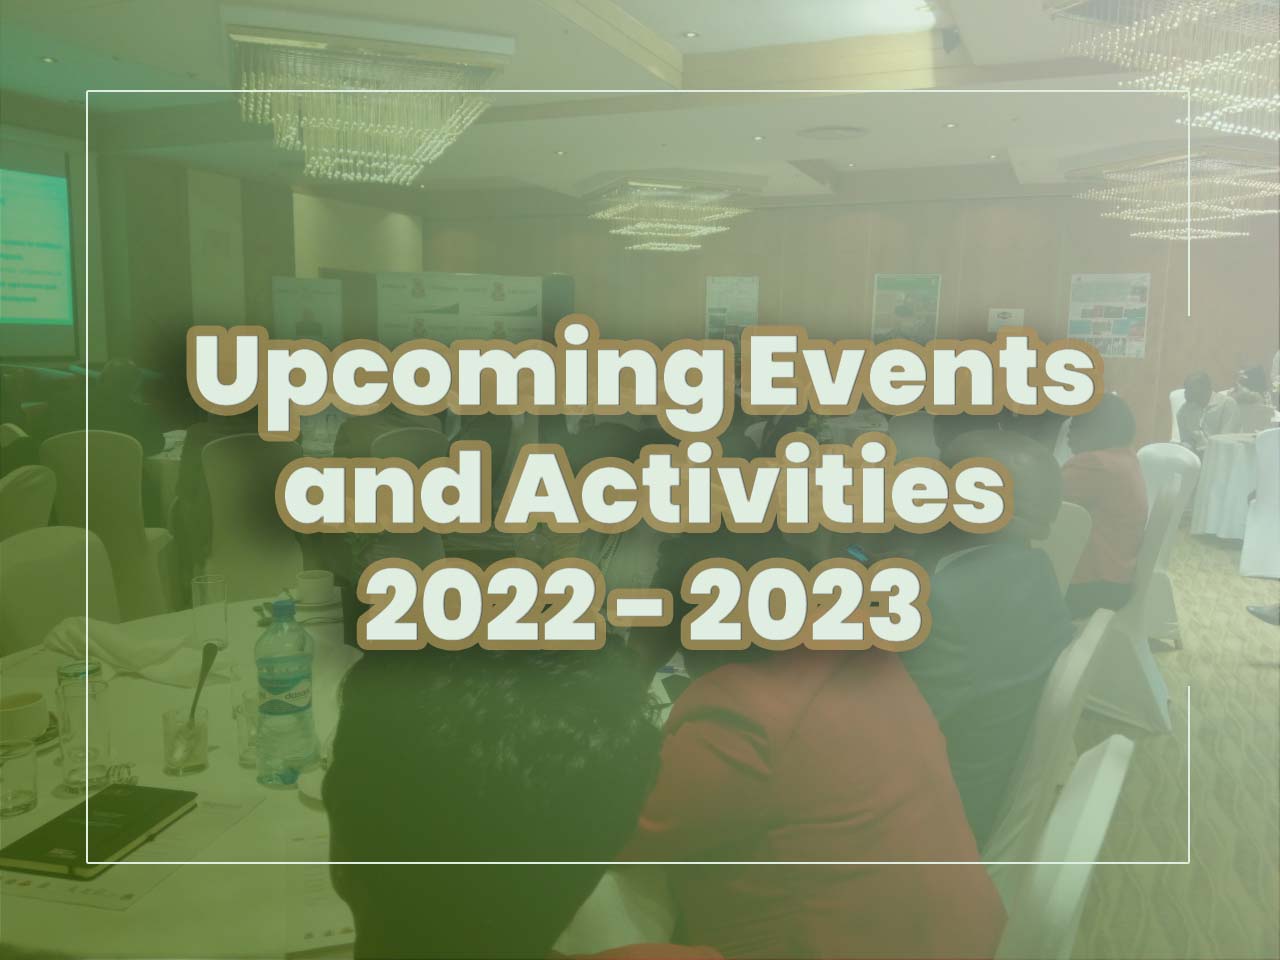 Upcoming Events and Activities, 2022 / 2023